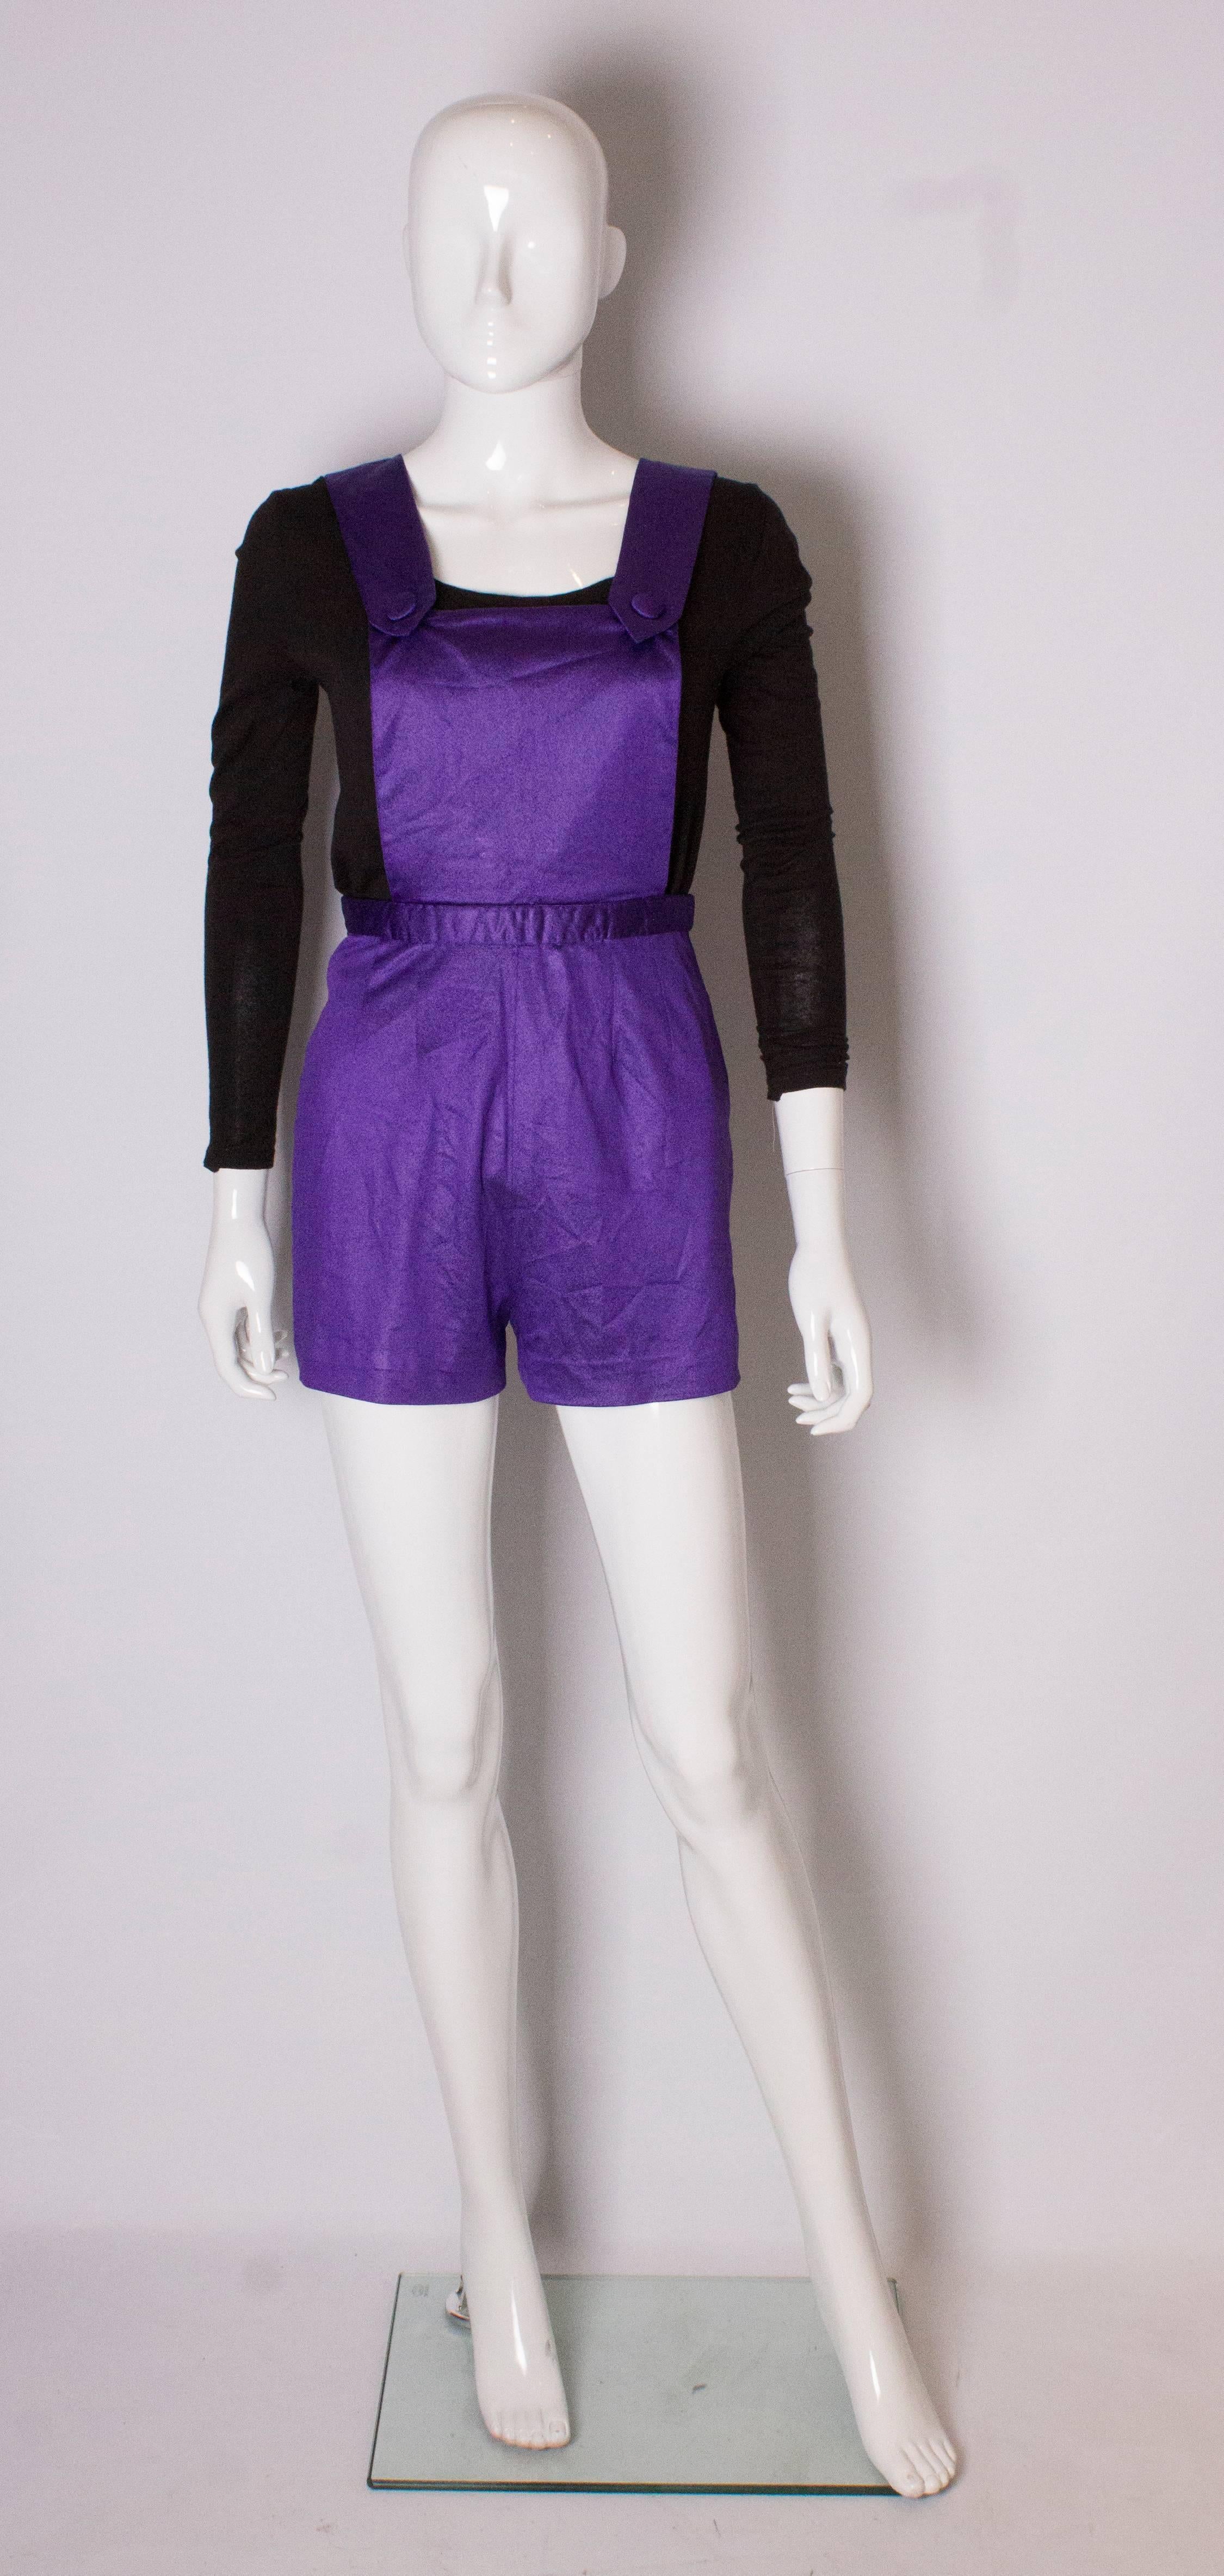 A great short playsuit in purple. The playsuit has a zip opening at the back, and popper studs on the bib.
Bust 34/36'', waist 24'', lenght 30''